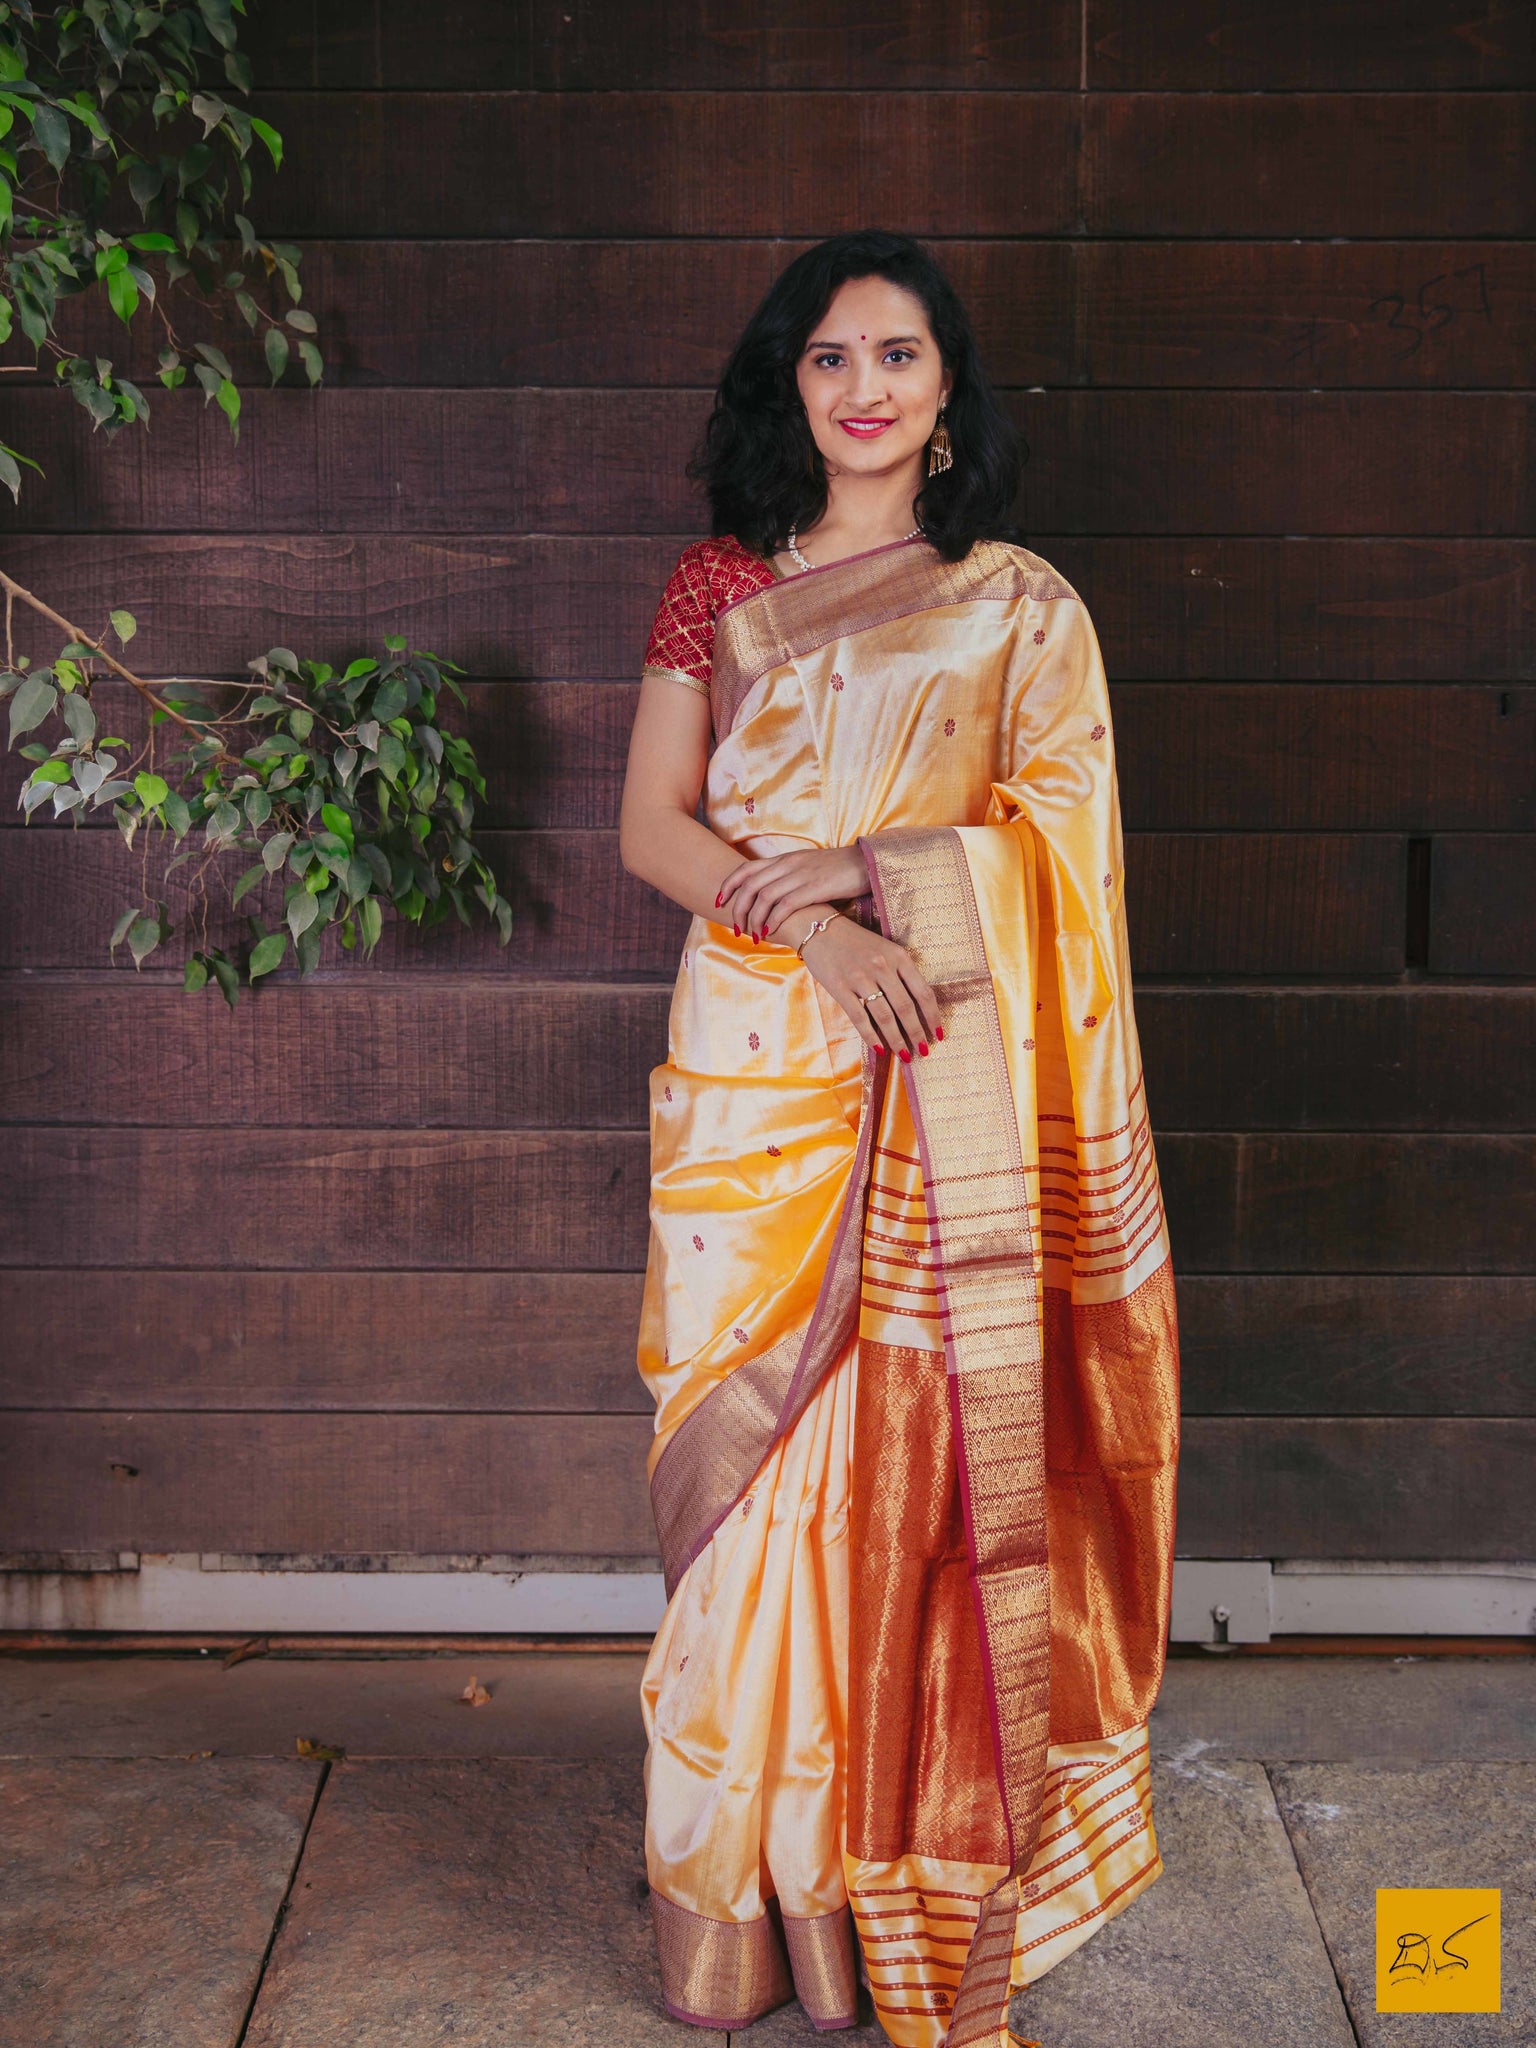 This is a wonderful Maheshwari Silk handwoven saree with a peach and yellow body. New trend of Maheshwari Silk Cotton saree designs, Maheshwari Silk Cotton saree for artists, art lovers, architects, saree lovers, saree connoisseurs, musicians, dancers, doctors, Maheshwari Silk Cotton Katan silk saree, indian saree images, latest sarees with price, only saree images, new Maheshwari Silk Cotton saree design.